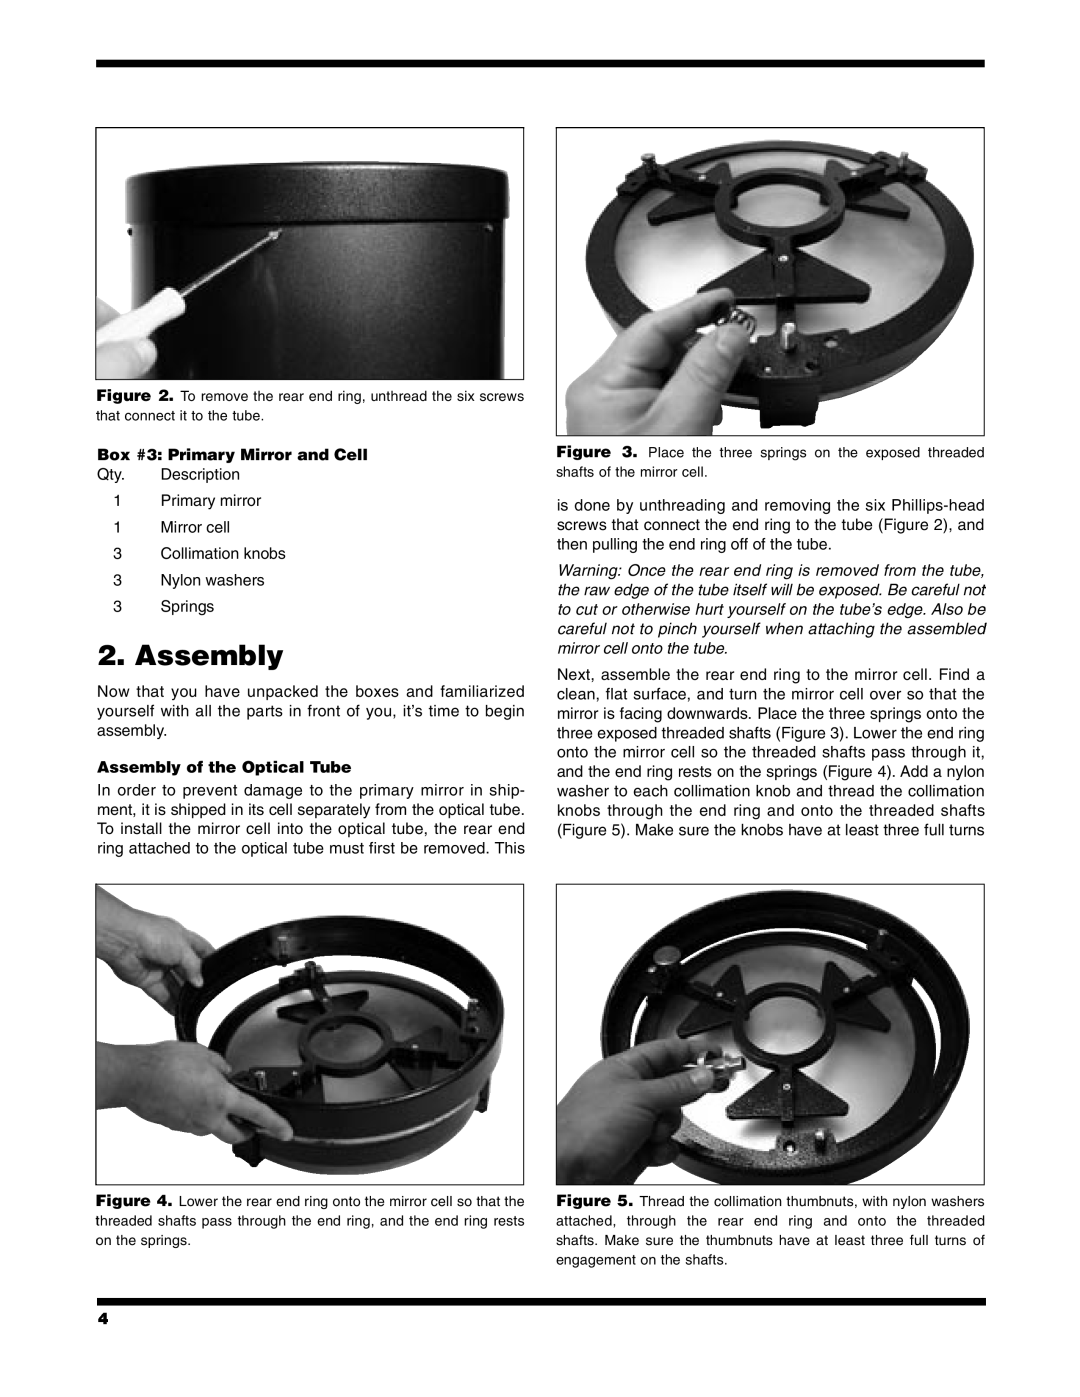 Orion 9966 instruction manual Box #3 Primary Mirror and Cell, Assembly of the Optical Tube 